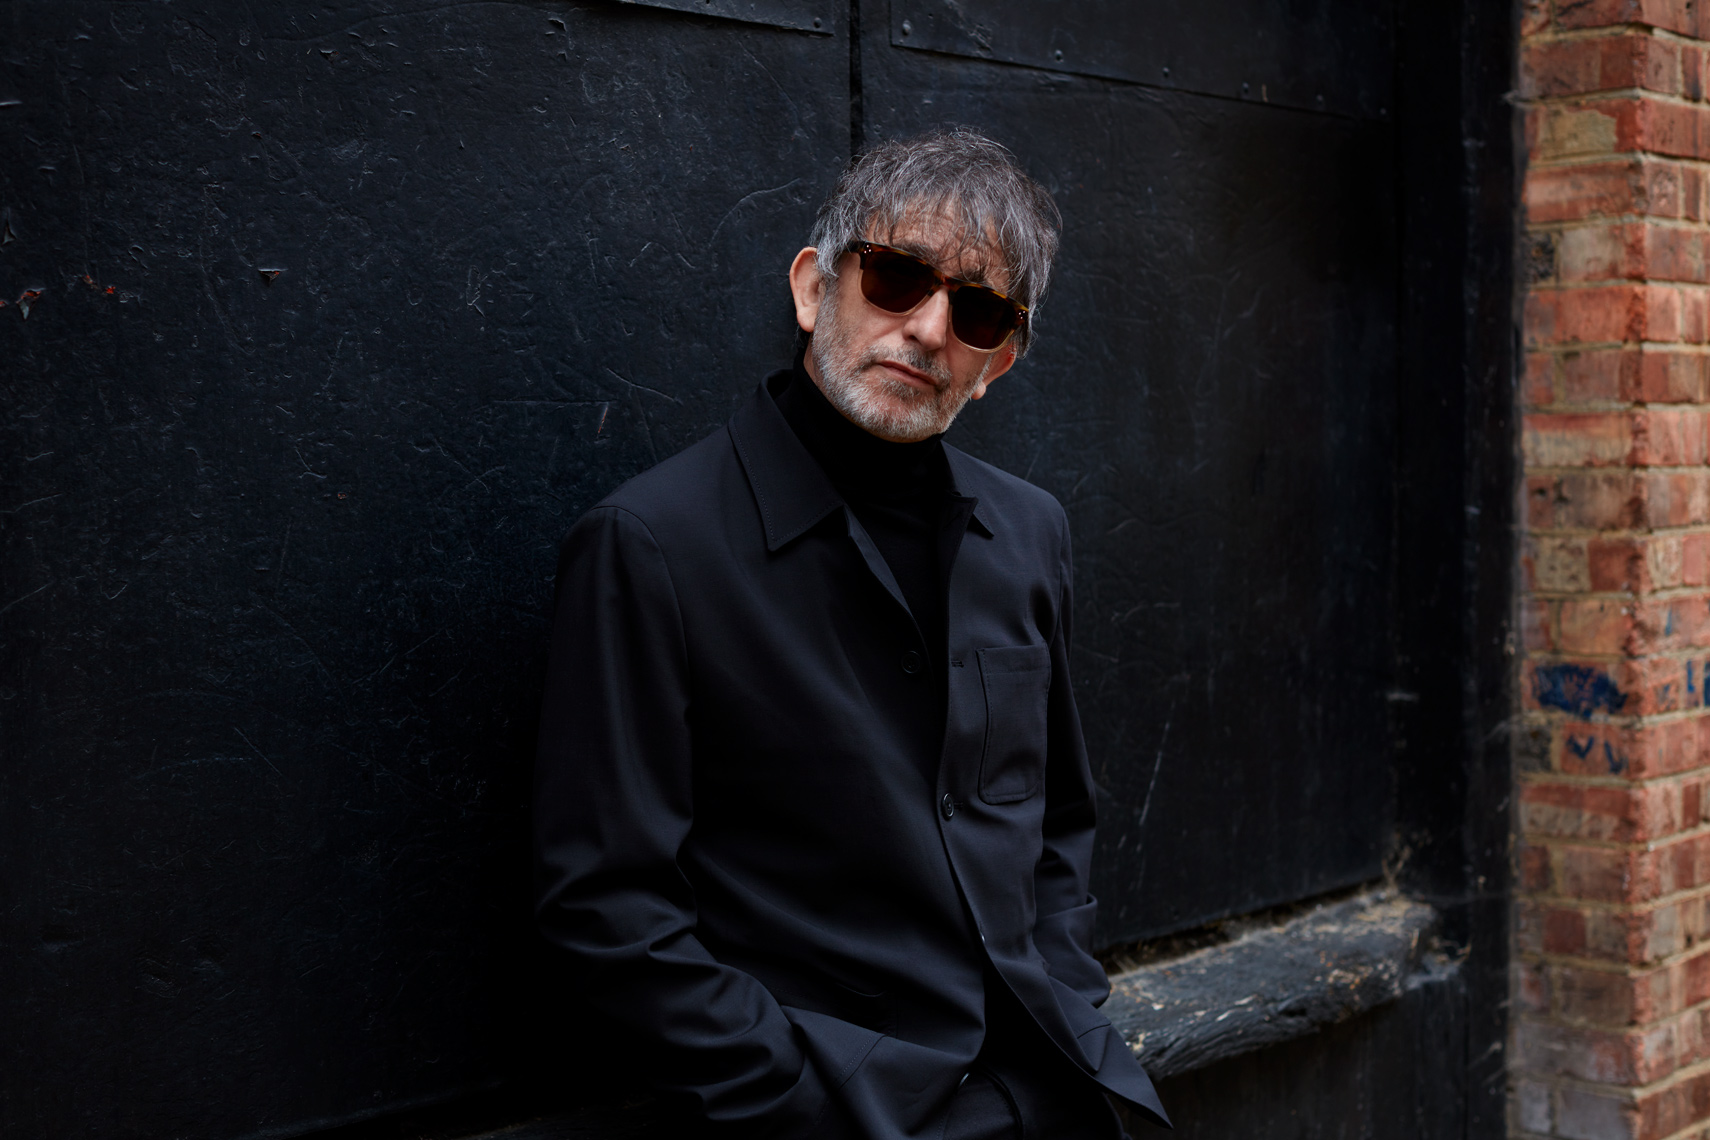 ian broudie photographed by tom oxley